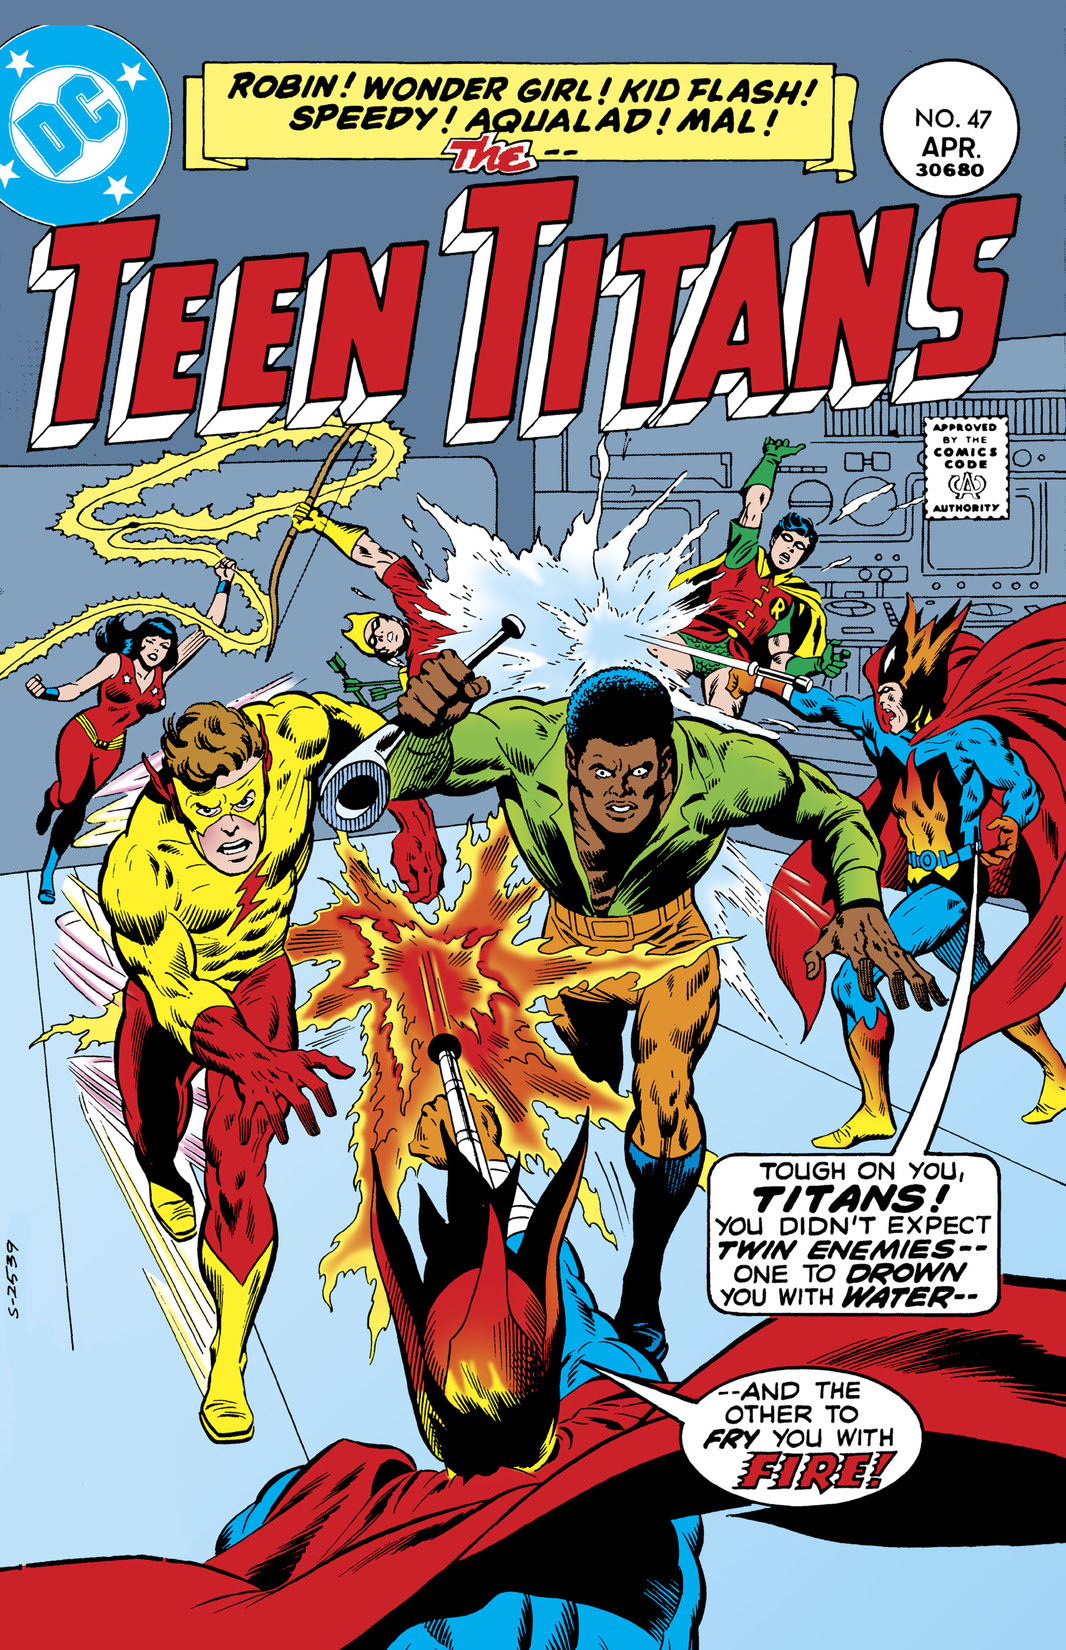 Teen Titans (1966-) #47 preview images